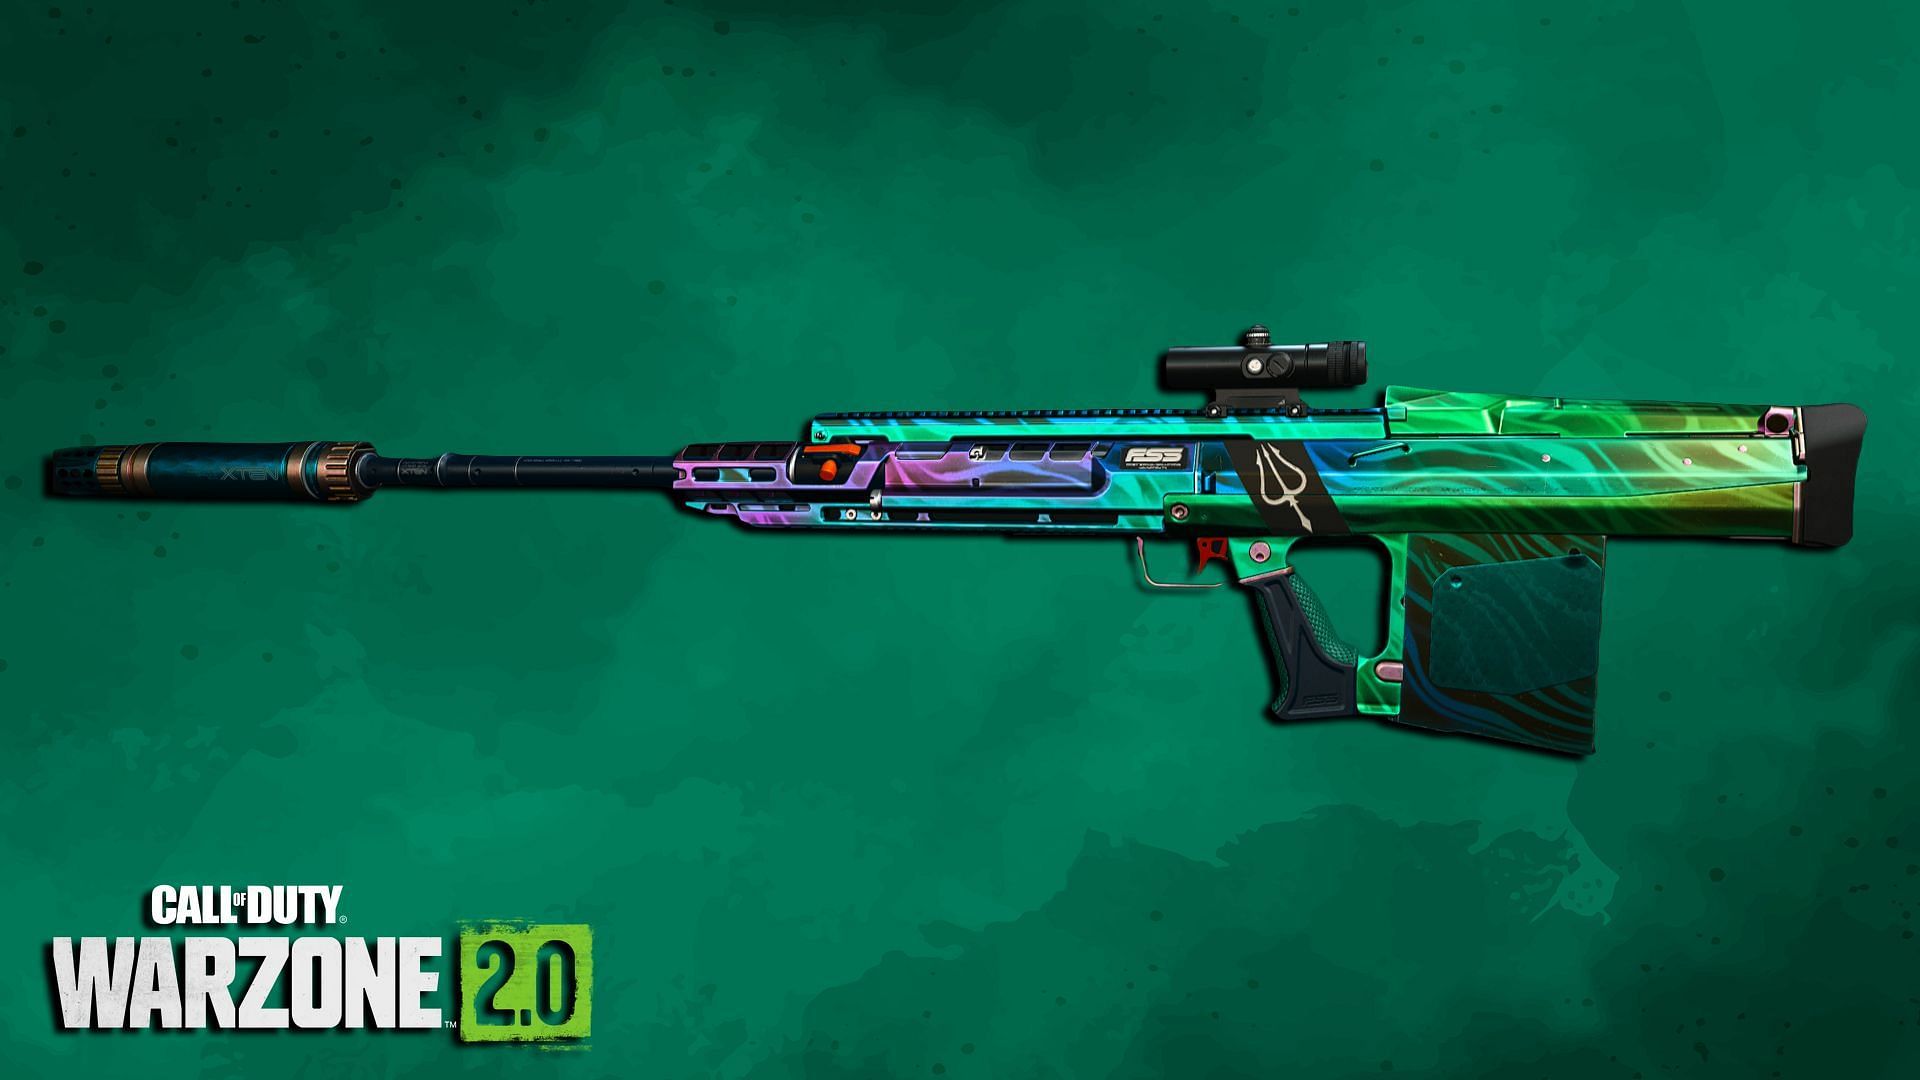 Signal 50 Sniper Rifle with a green background and a Warzone 2 logo at the bottom left corner.